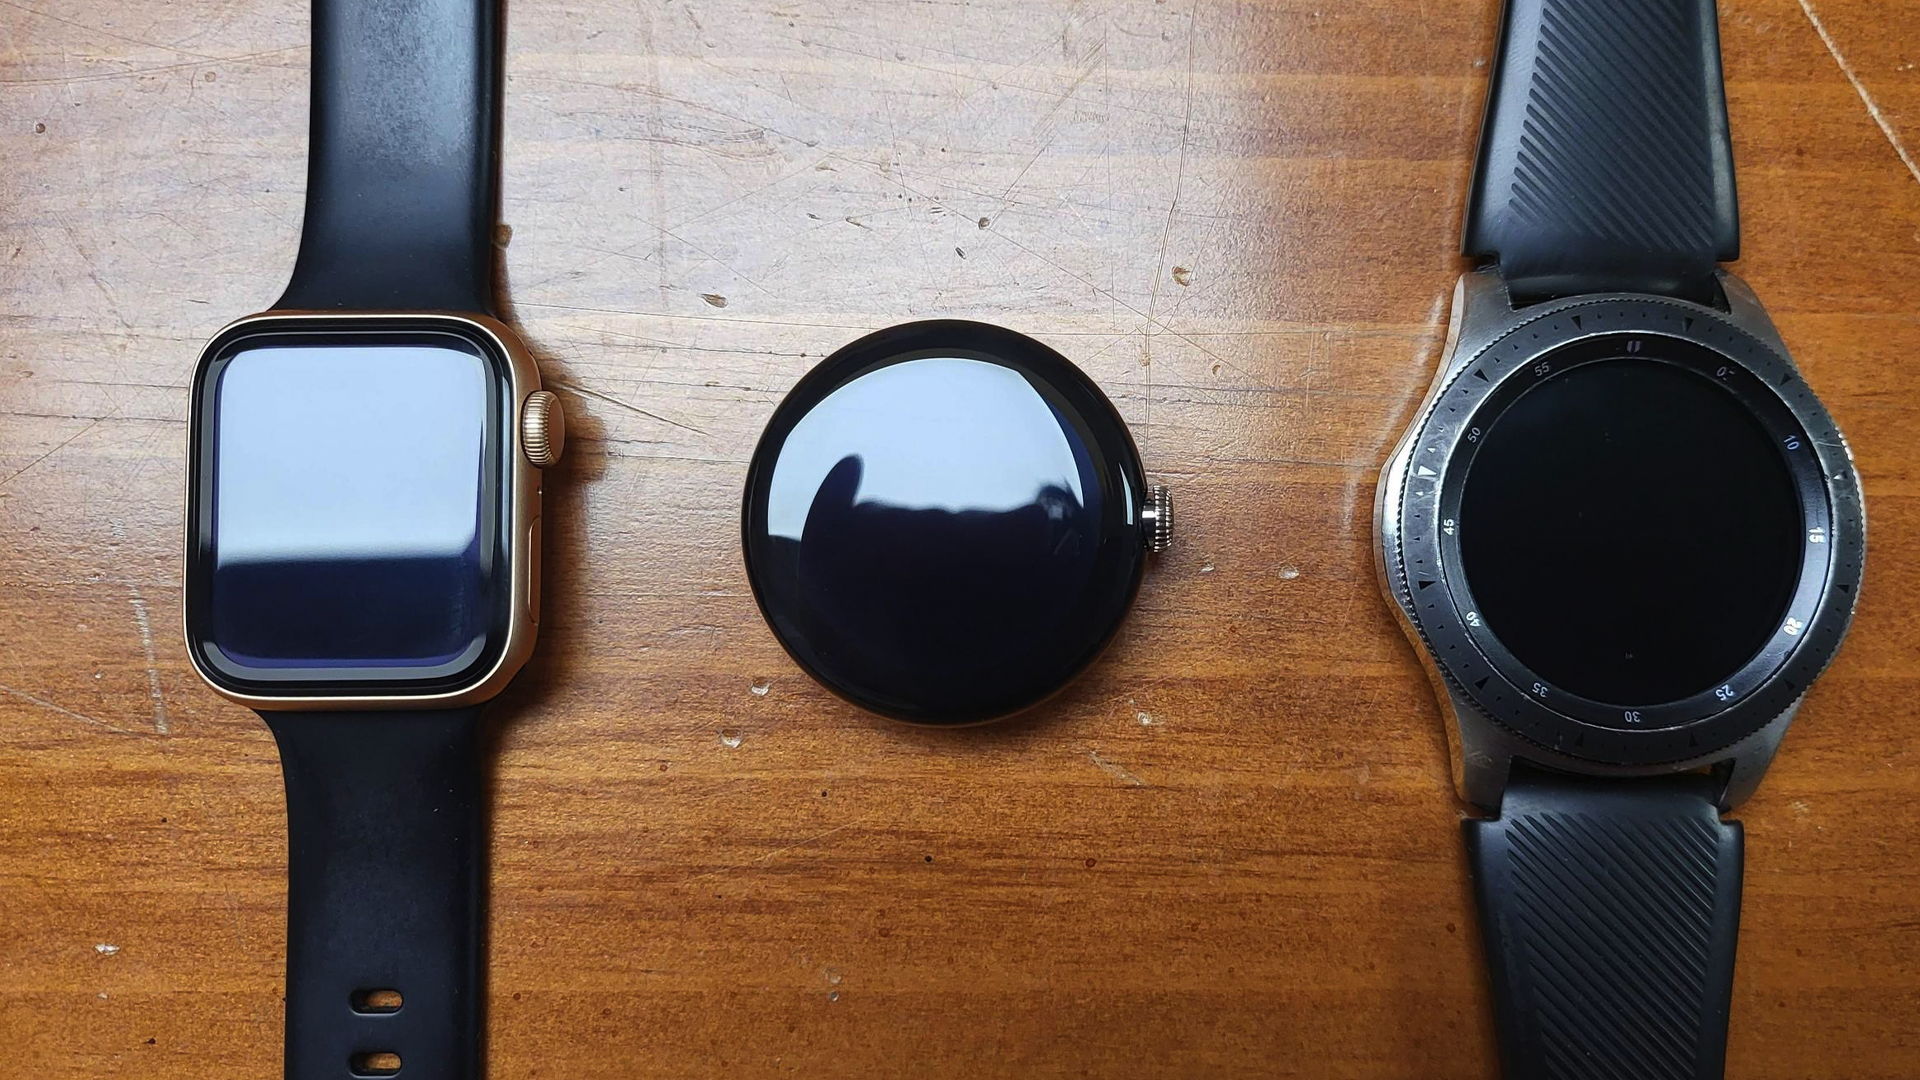 New Images) The Pixel Watch May Have Larger Bezels Than We Expected – Review Geek